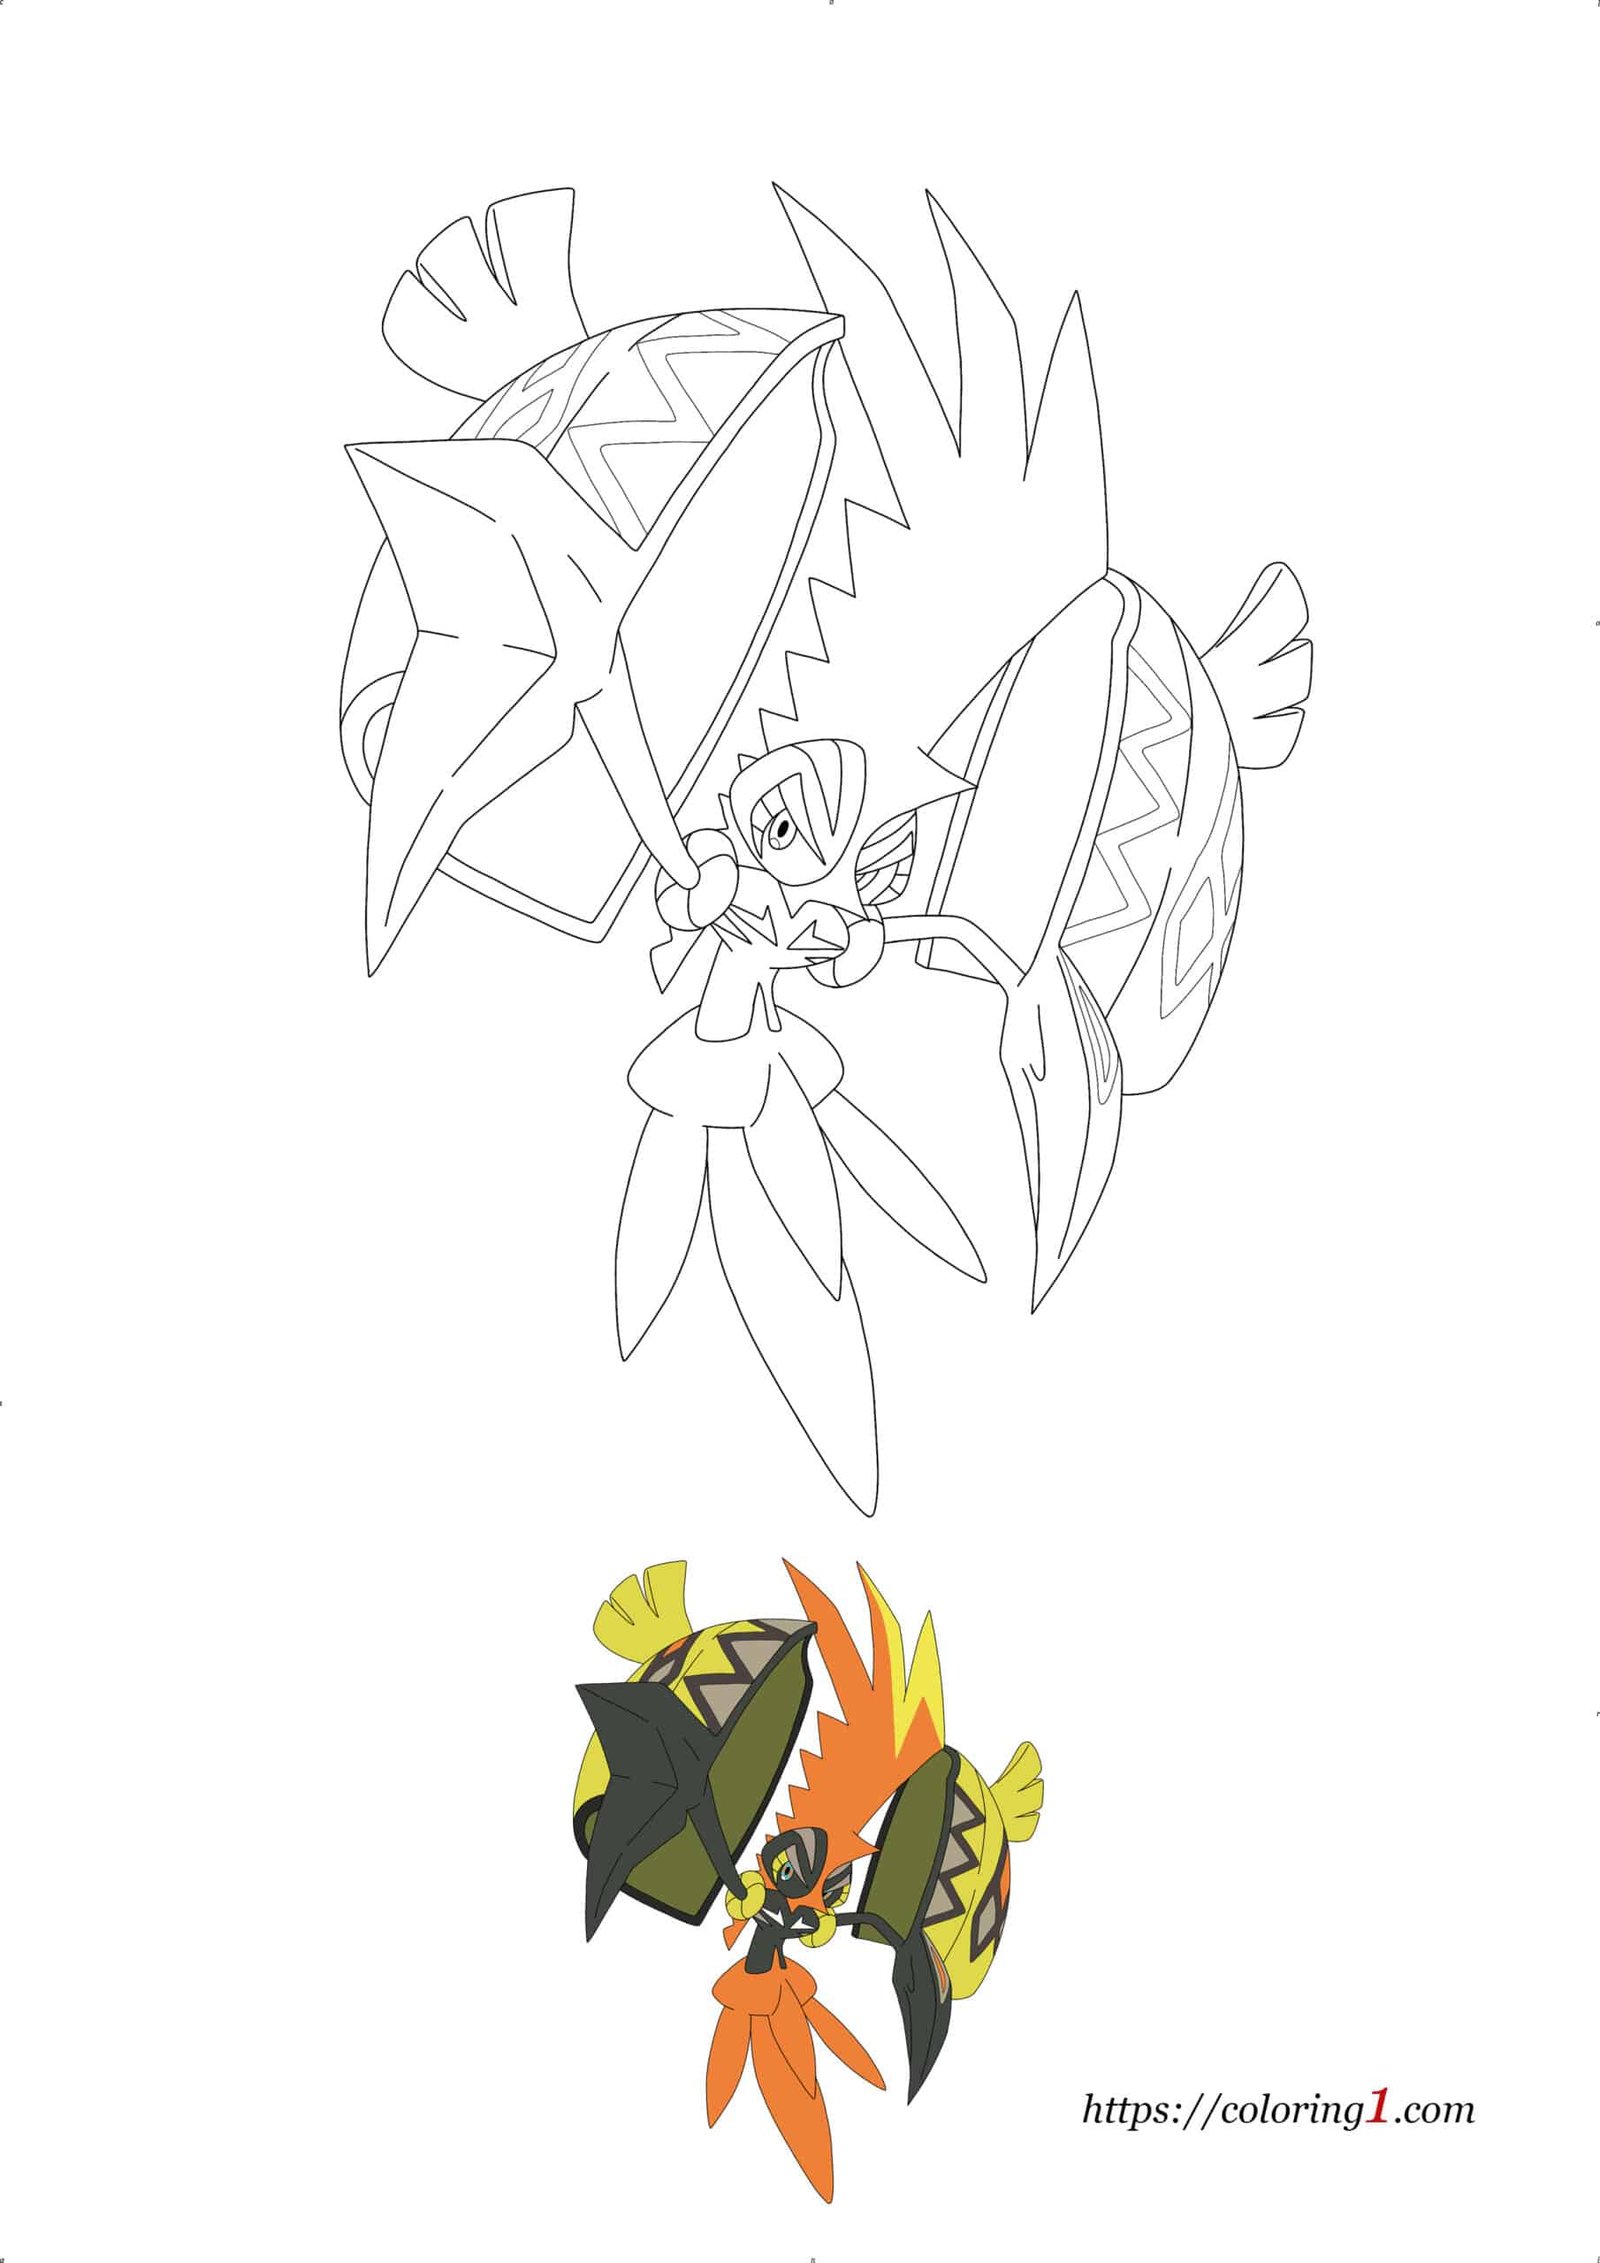 Pokemon Tapu Koko hard online coloring page to print for adults and kids